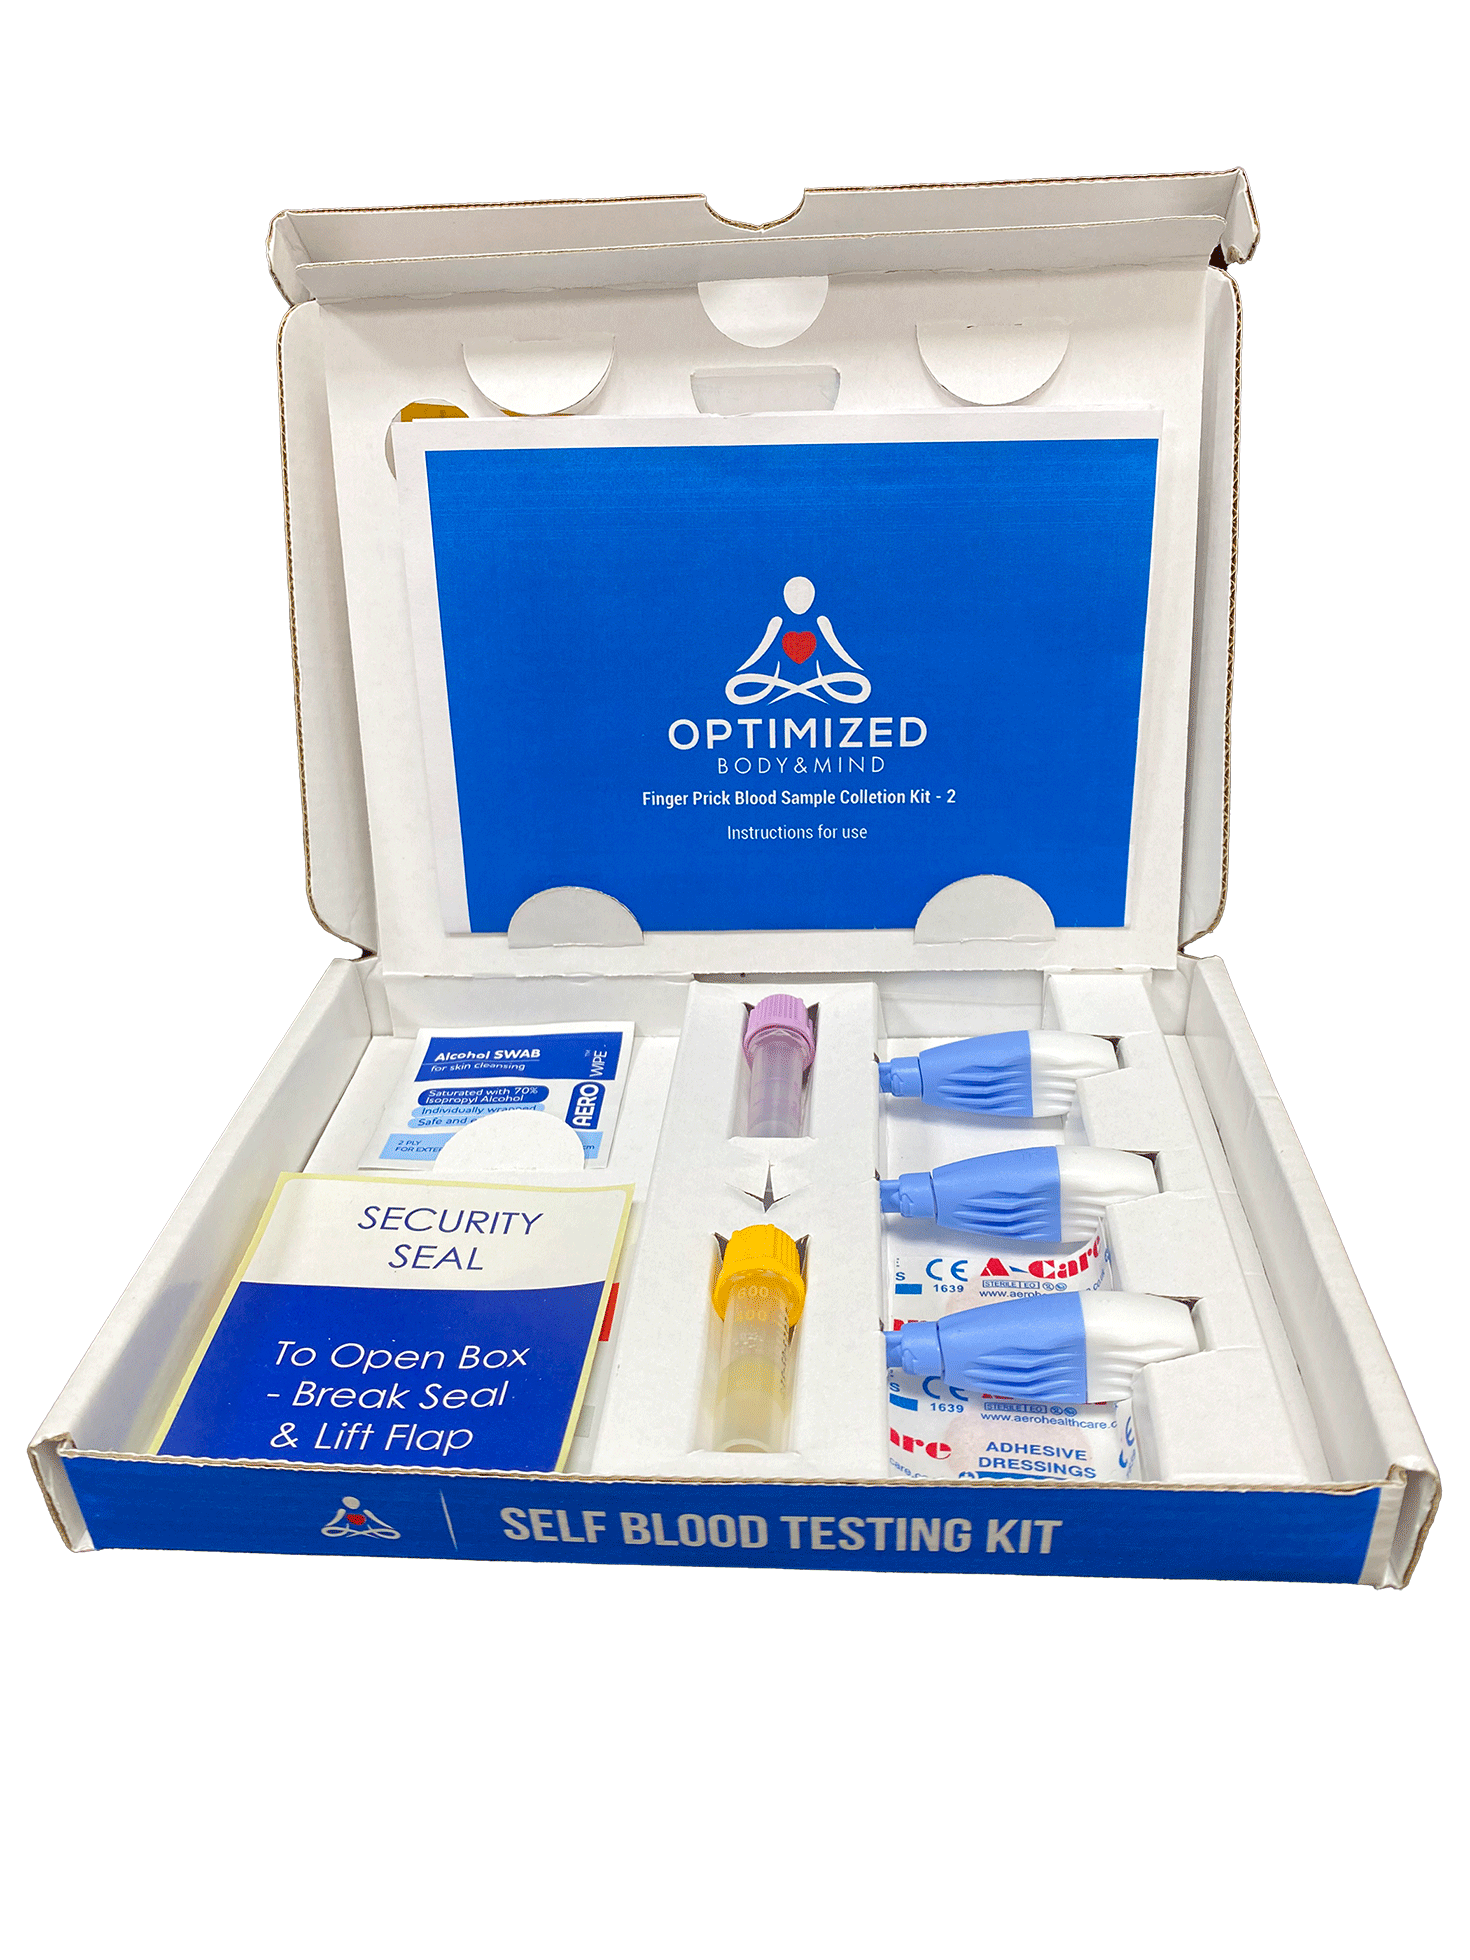 Testosterone Blood Test – Official Rapid Tests